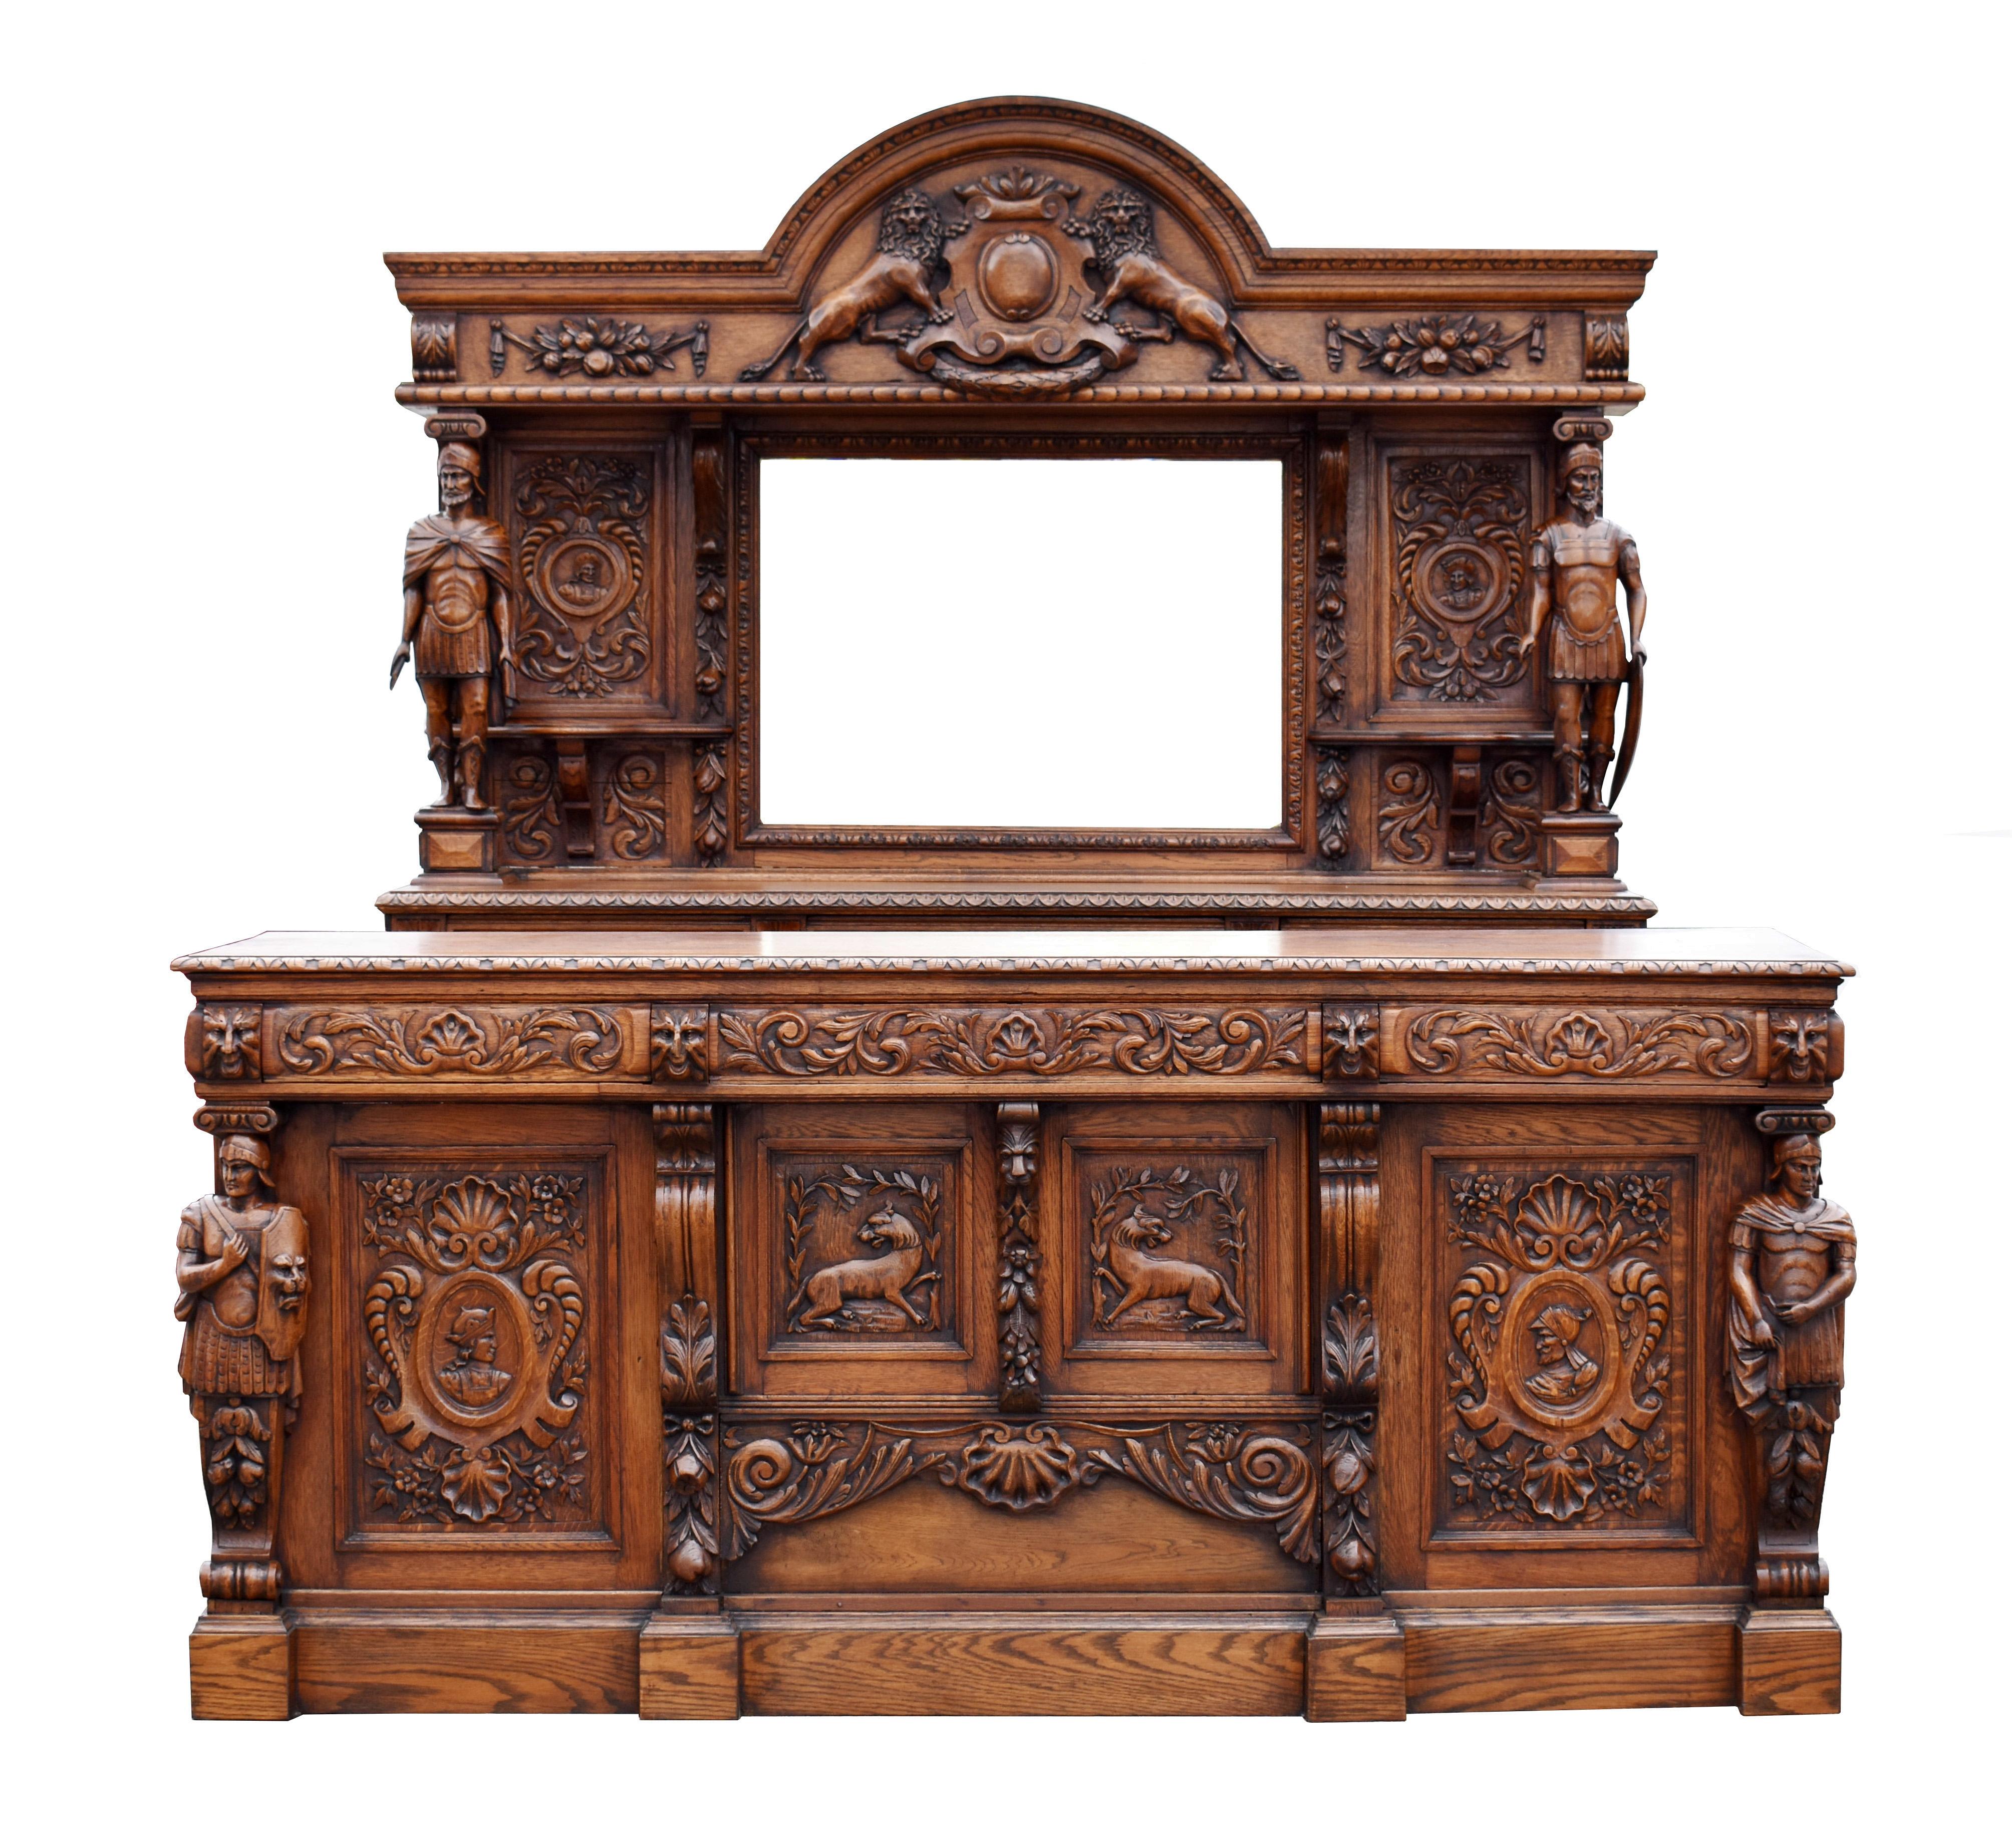 For sale is a very good quality English Victorian hand carved oak front and back bar. The arched pediment having an ornately carved lion motif in the center, supported by well carved figures either side of carved panels and a beveled mirror to the